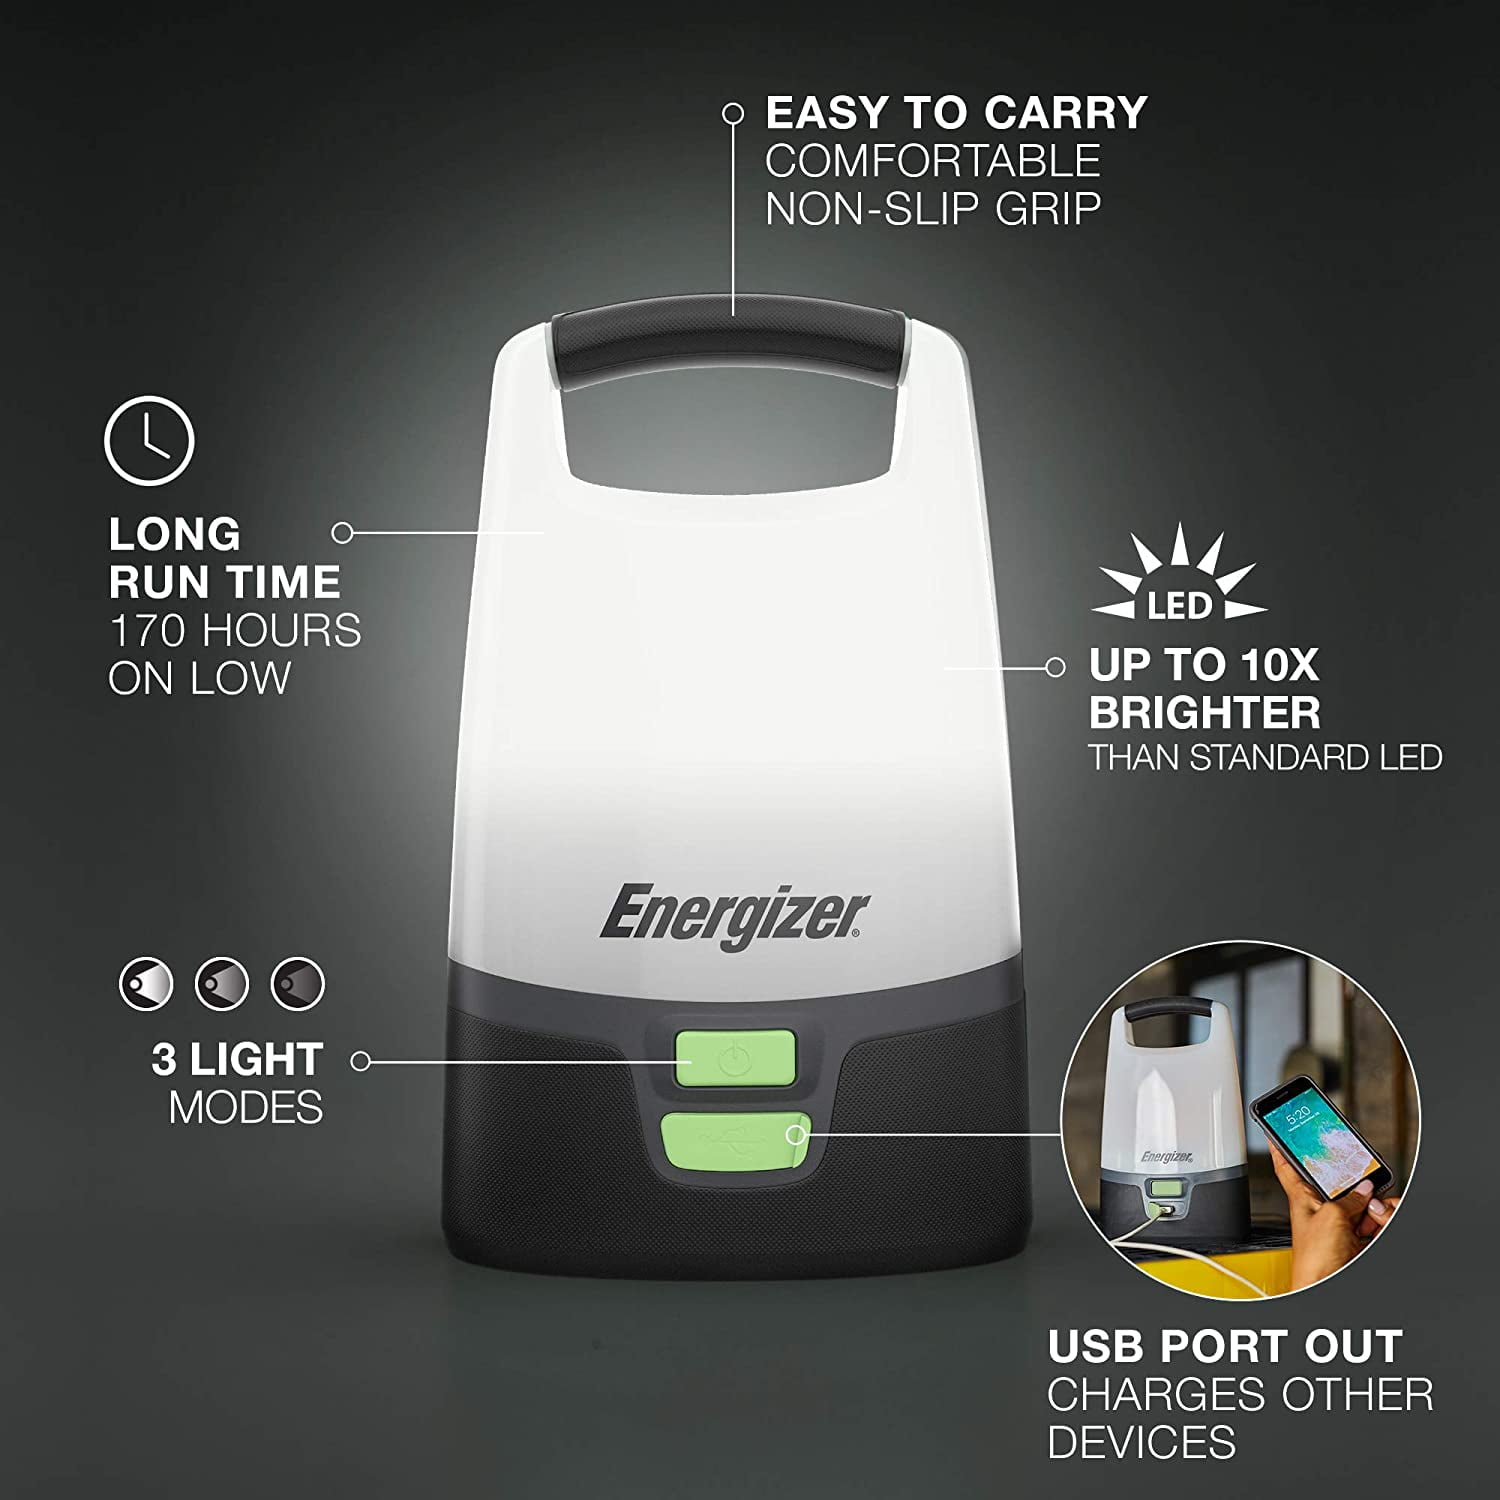 Light, Vision Lantern, or Outdoor Devices Light Camping Port Energizer to Lantern, Versatile USB LED Emergency Charge